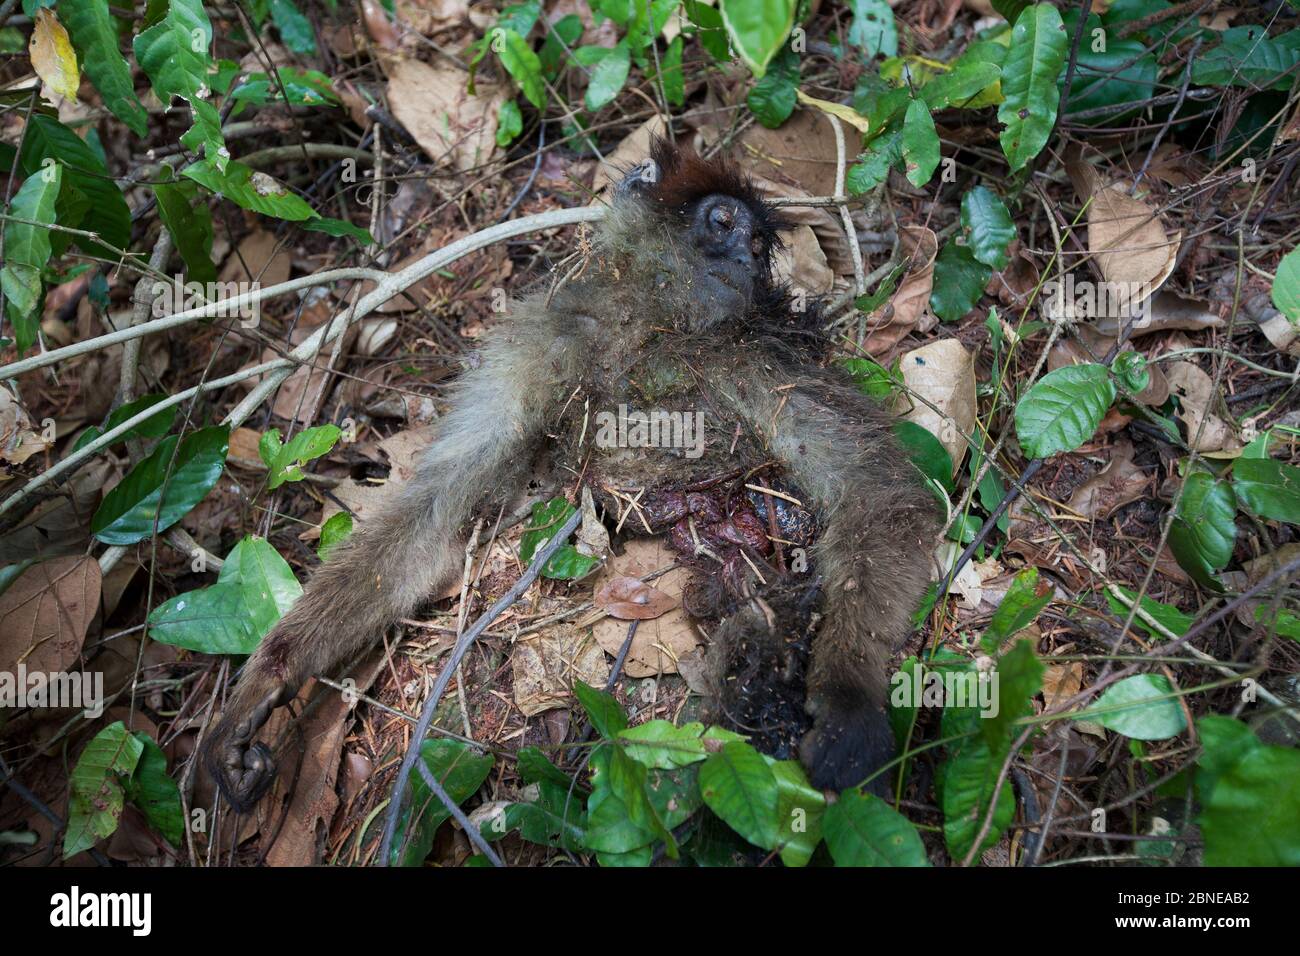 Remains of a Pennant red colobus (Procolobus pennantii tephrosceles) that was hunted and eaten by  Chimpanzees (Pan troglodytes schweinfurthii) Gombe Stock Photo